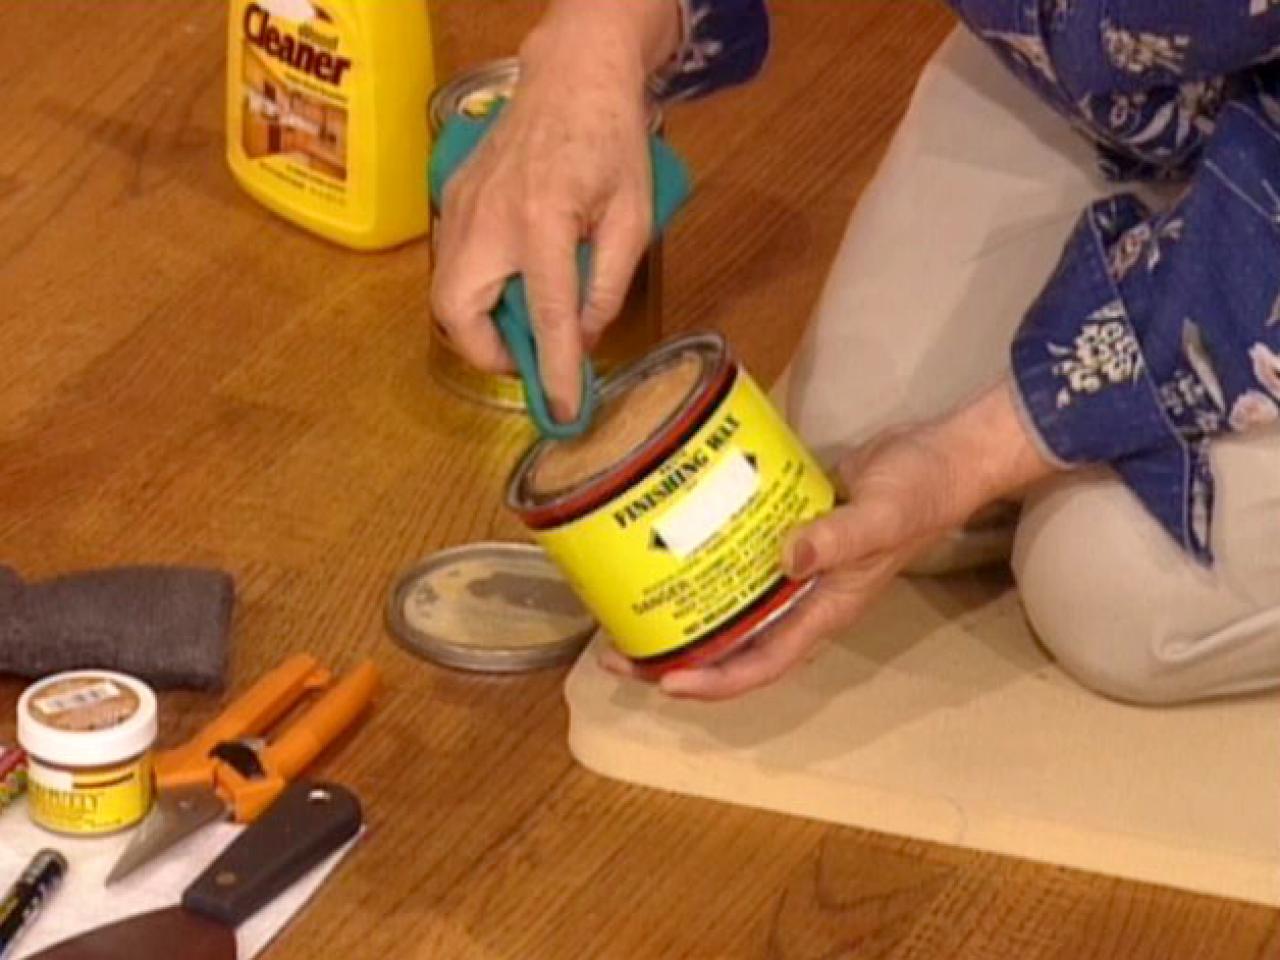 How To Touch Up Wood Floors Tos Diy, Strip And Wax Hardwood Floors